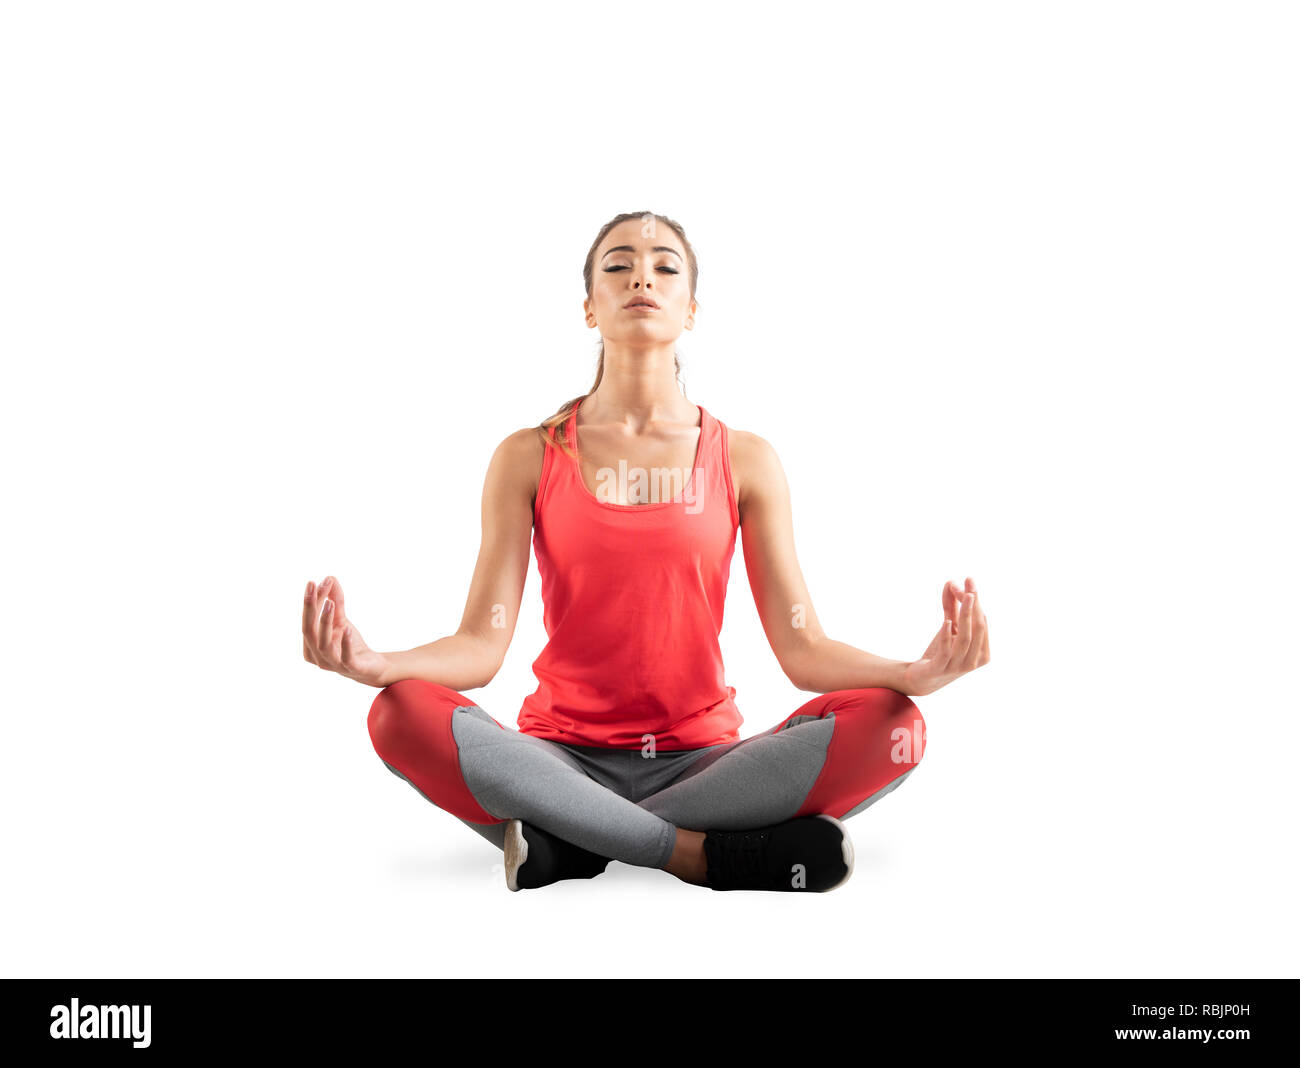 Young Girl relaxing in yoga position. Isolé sur fond blanc Banque D'Images